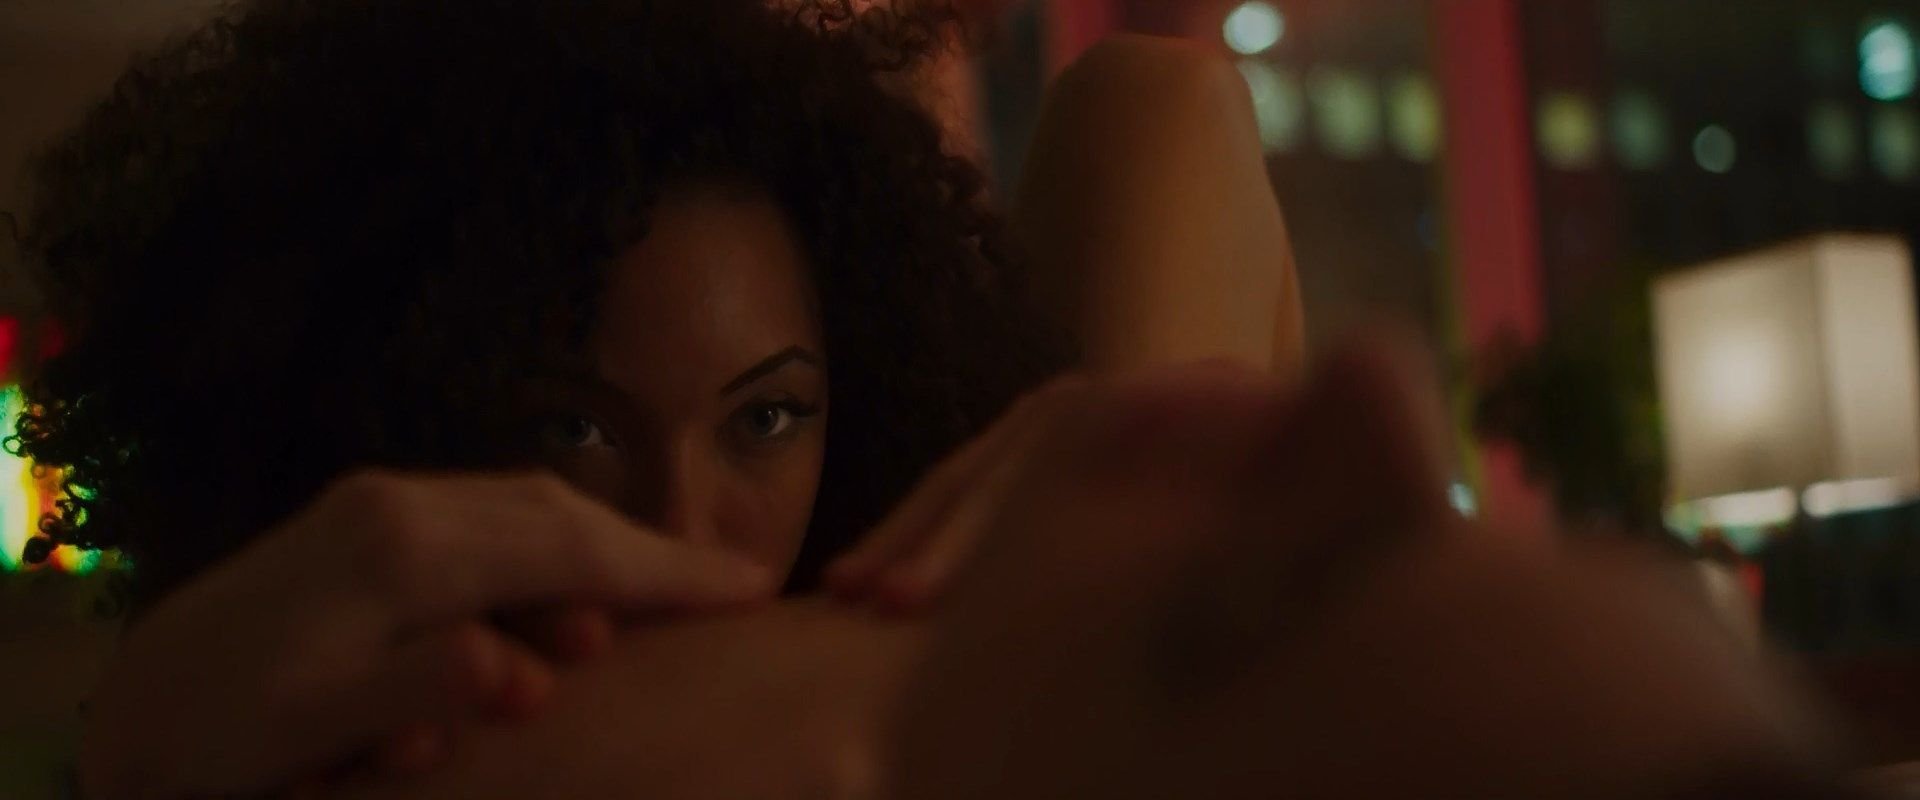 Logan Browning, Allison Williams Nude - The Perfection (12 Pics + GIF & Video)